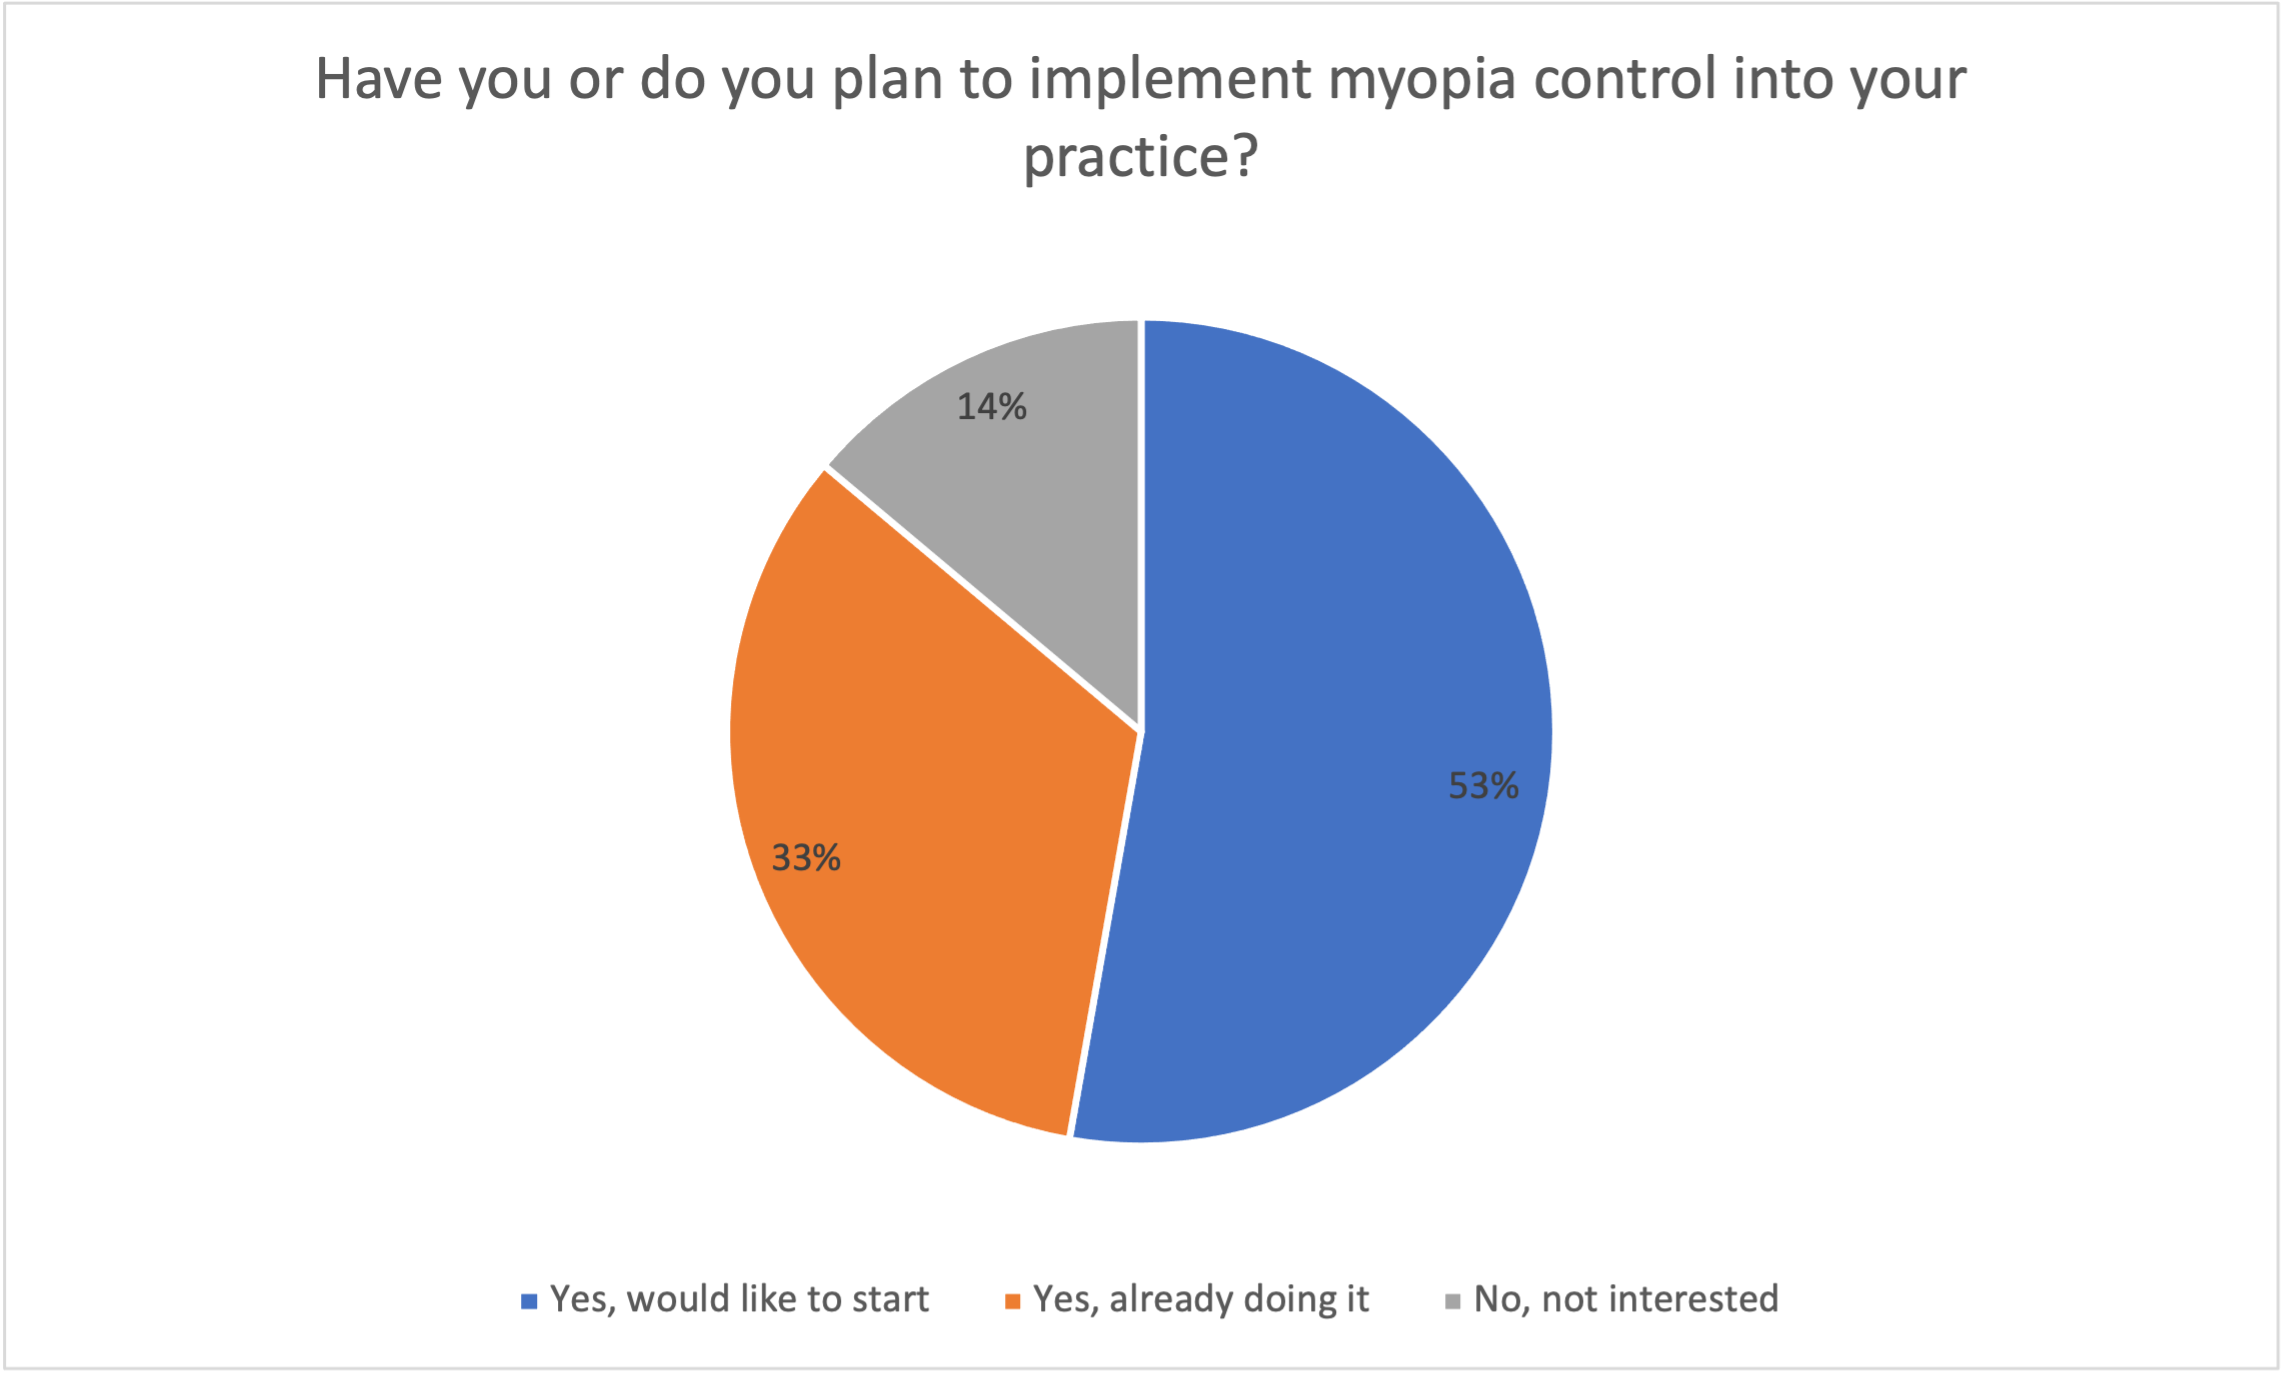 Poll results: Have you or do you plan to implement myopia control into your practice?